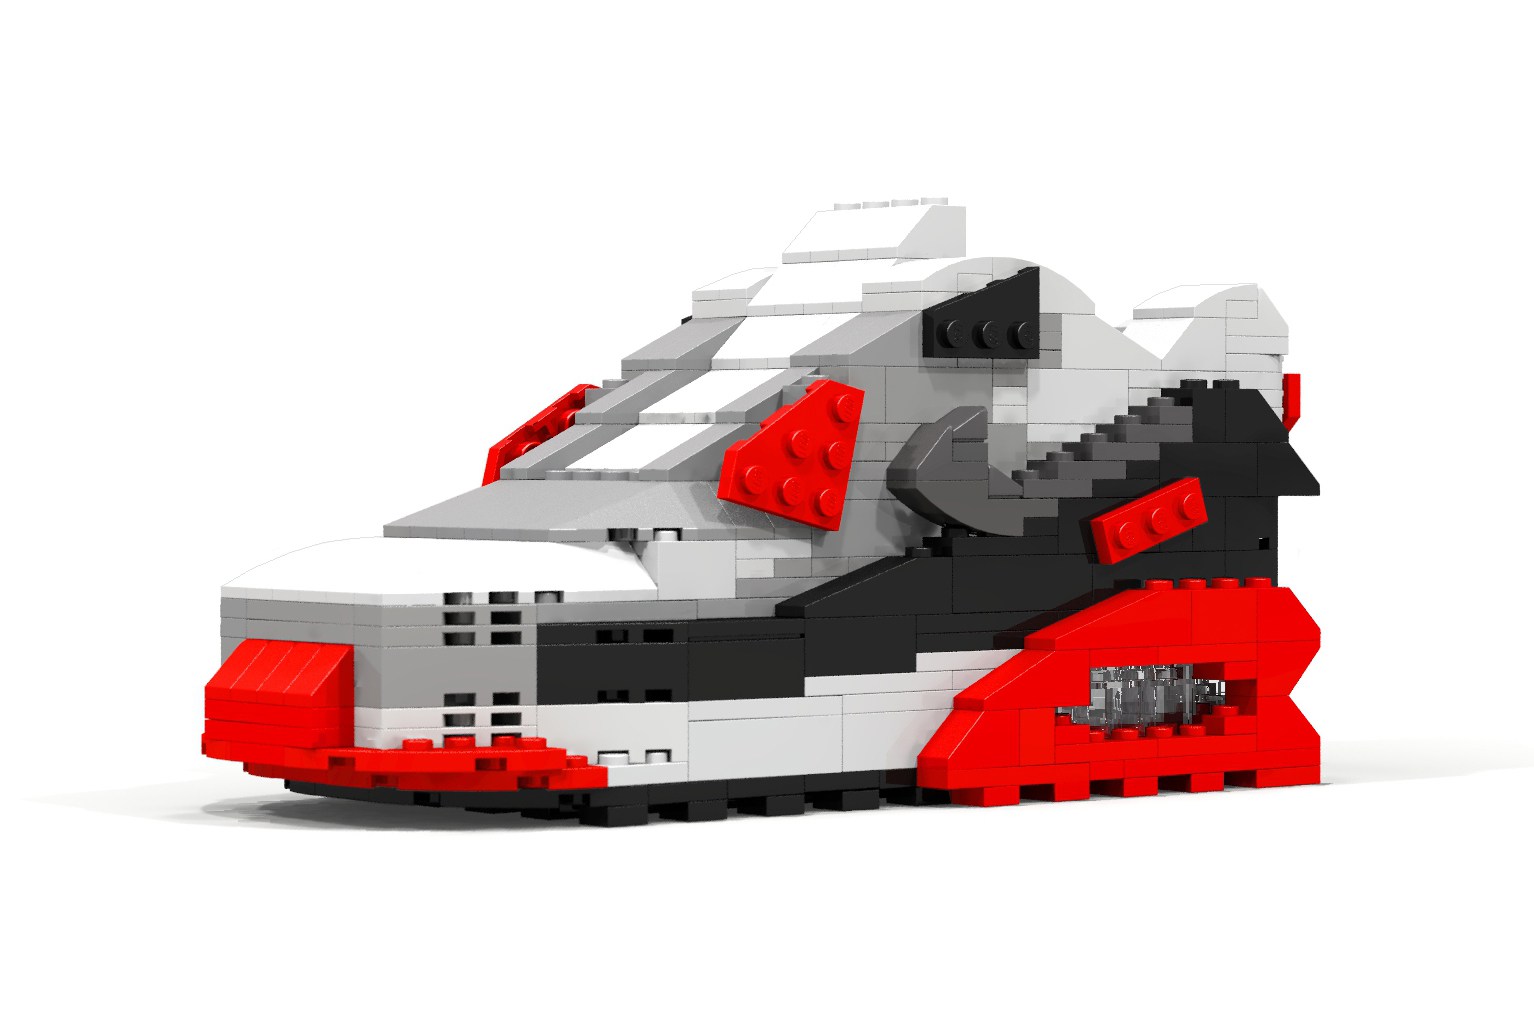 nikes-air-max-90-infrared-gets-remade-in-lego-3